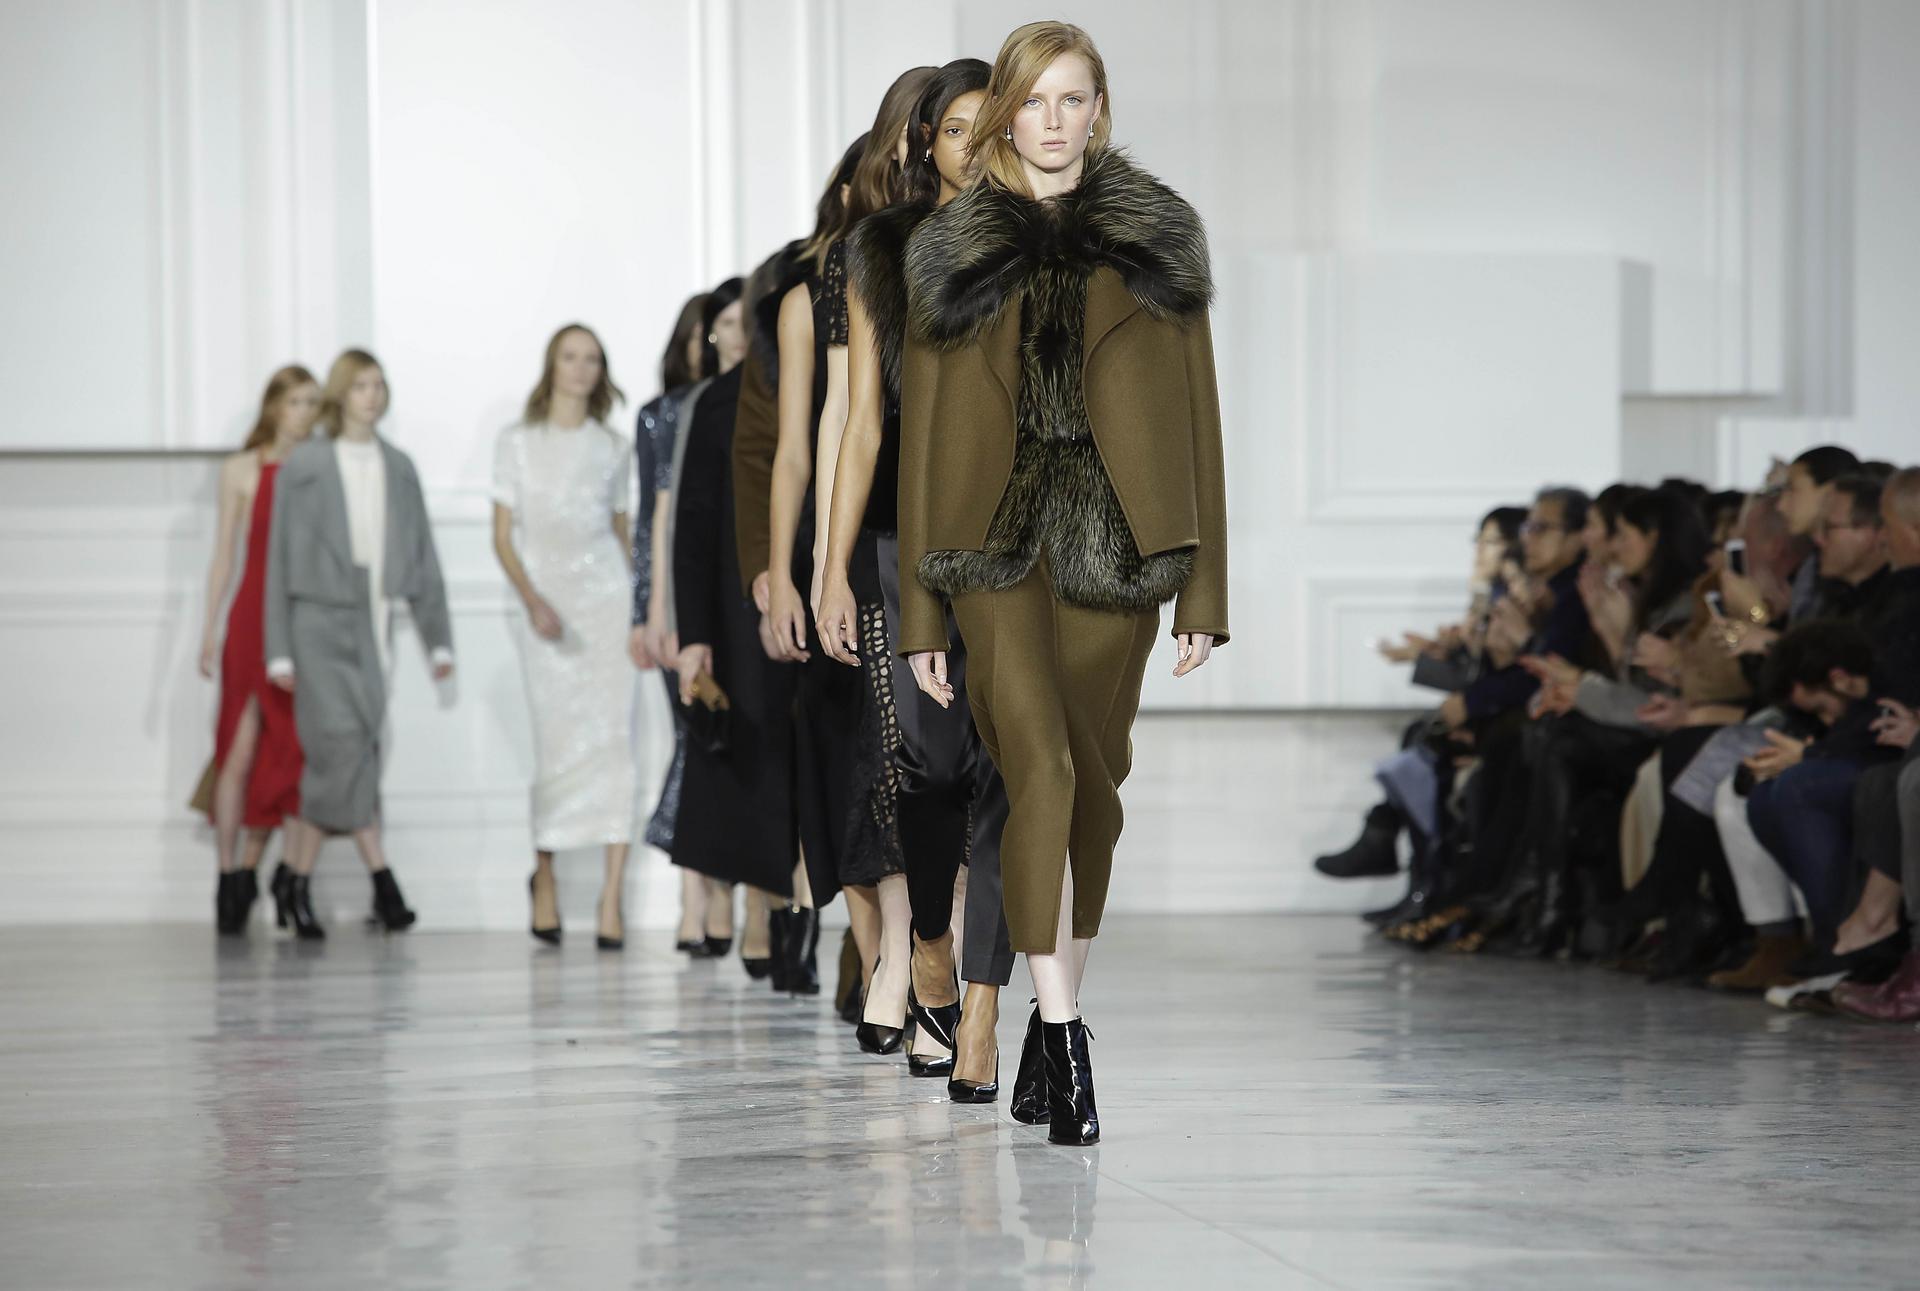 Jason Wu's New York Fashion Week show contrasted elegant tailored suits, jackets, coats and trousers with body-clinging sheath dresses with cut-out backs and thigh-revealing splits. Photo: AFP